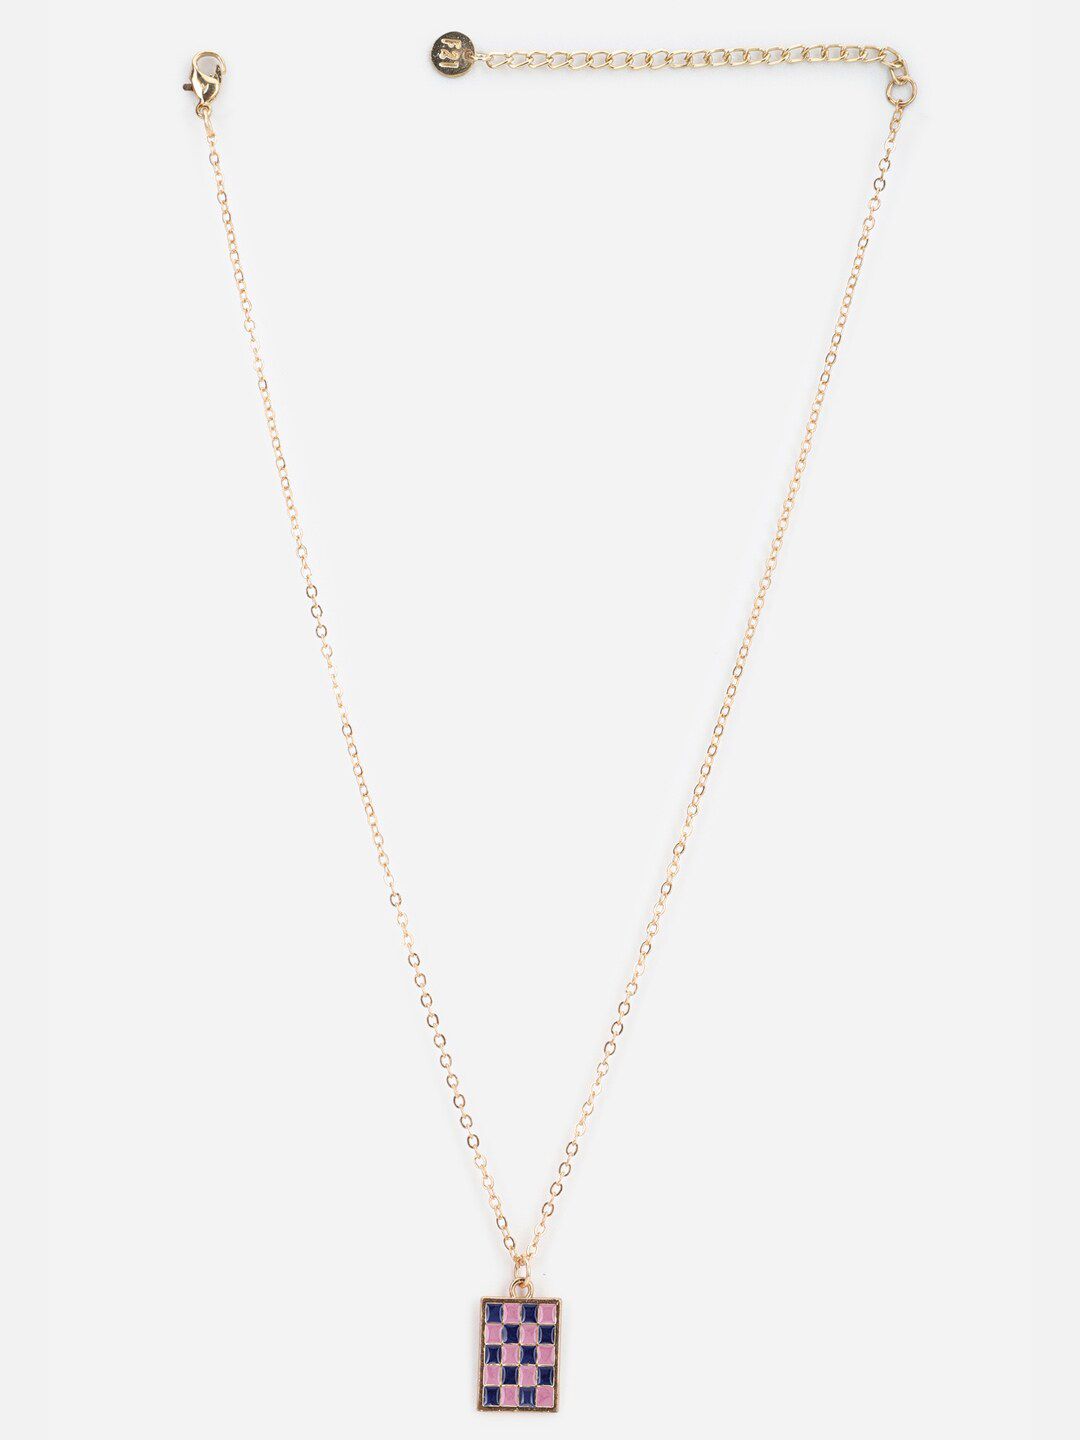 FOREVER 21 Pink & Blue Necklace Price in India